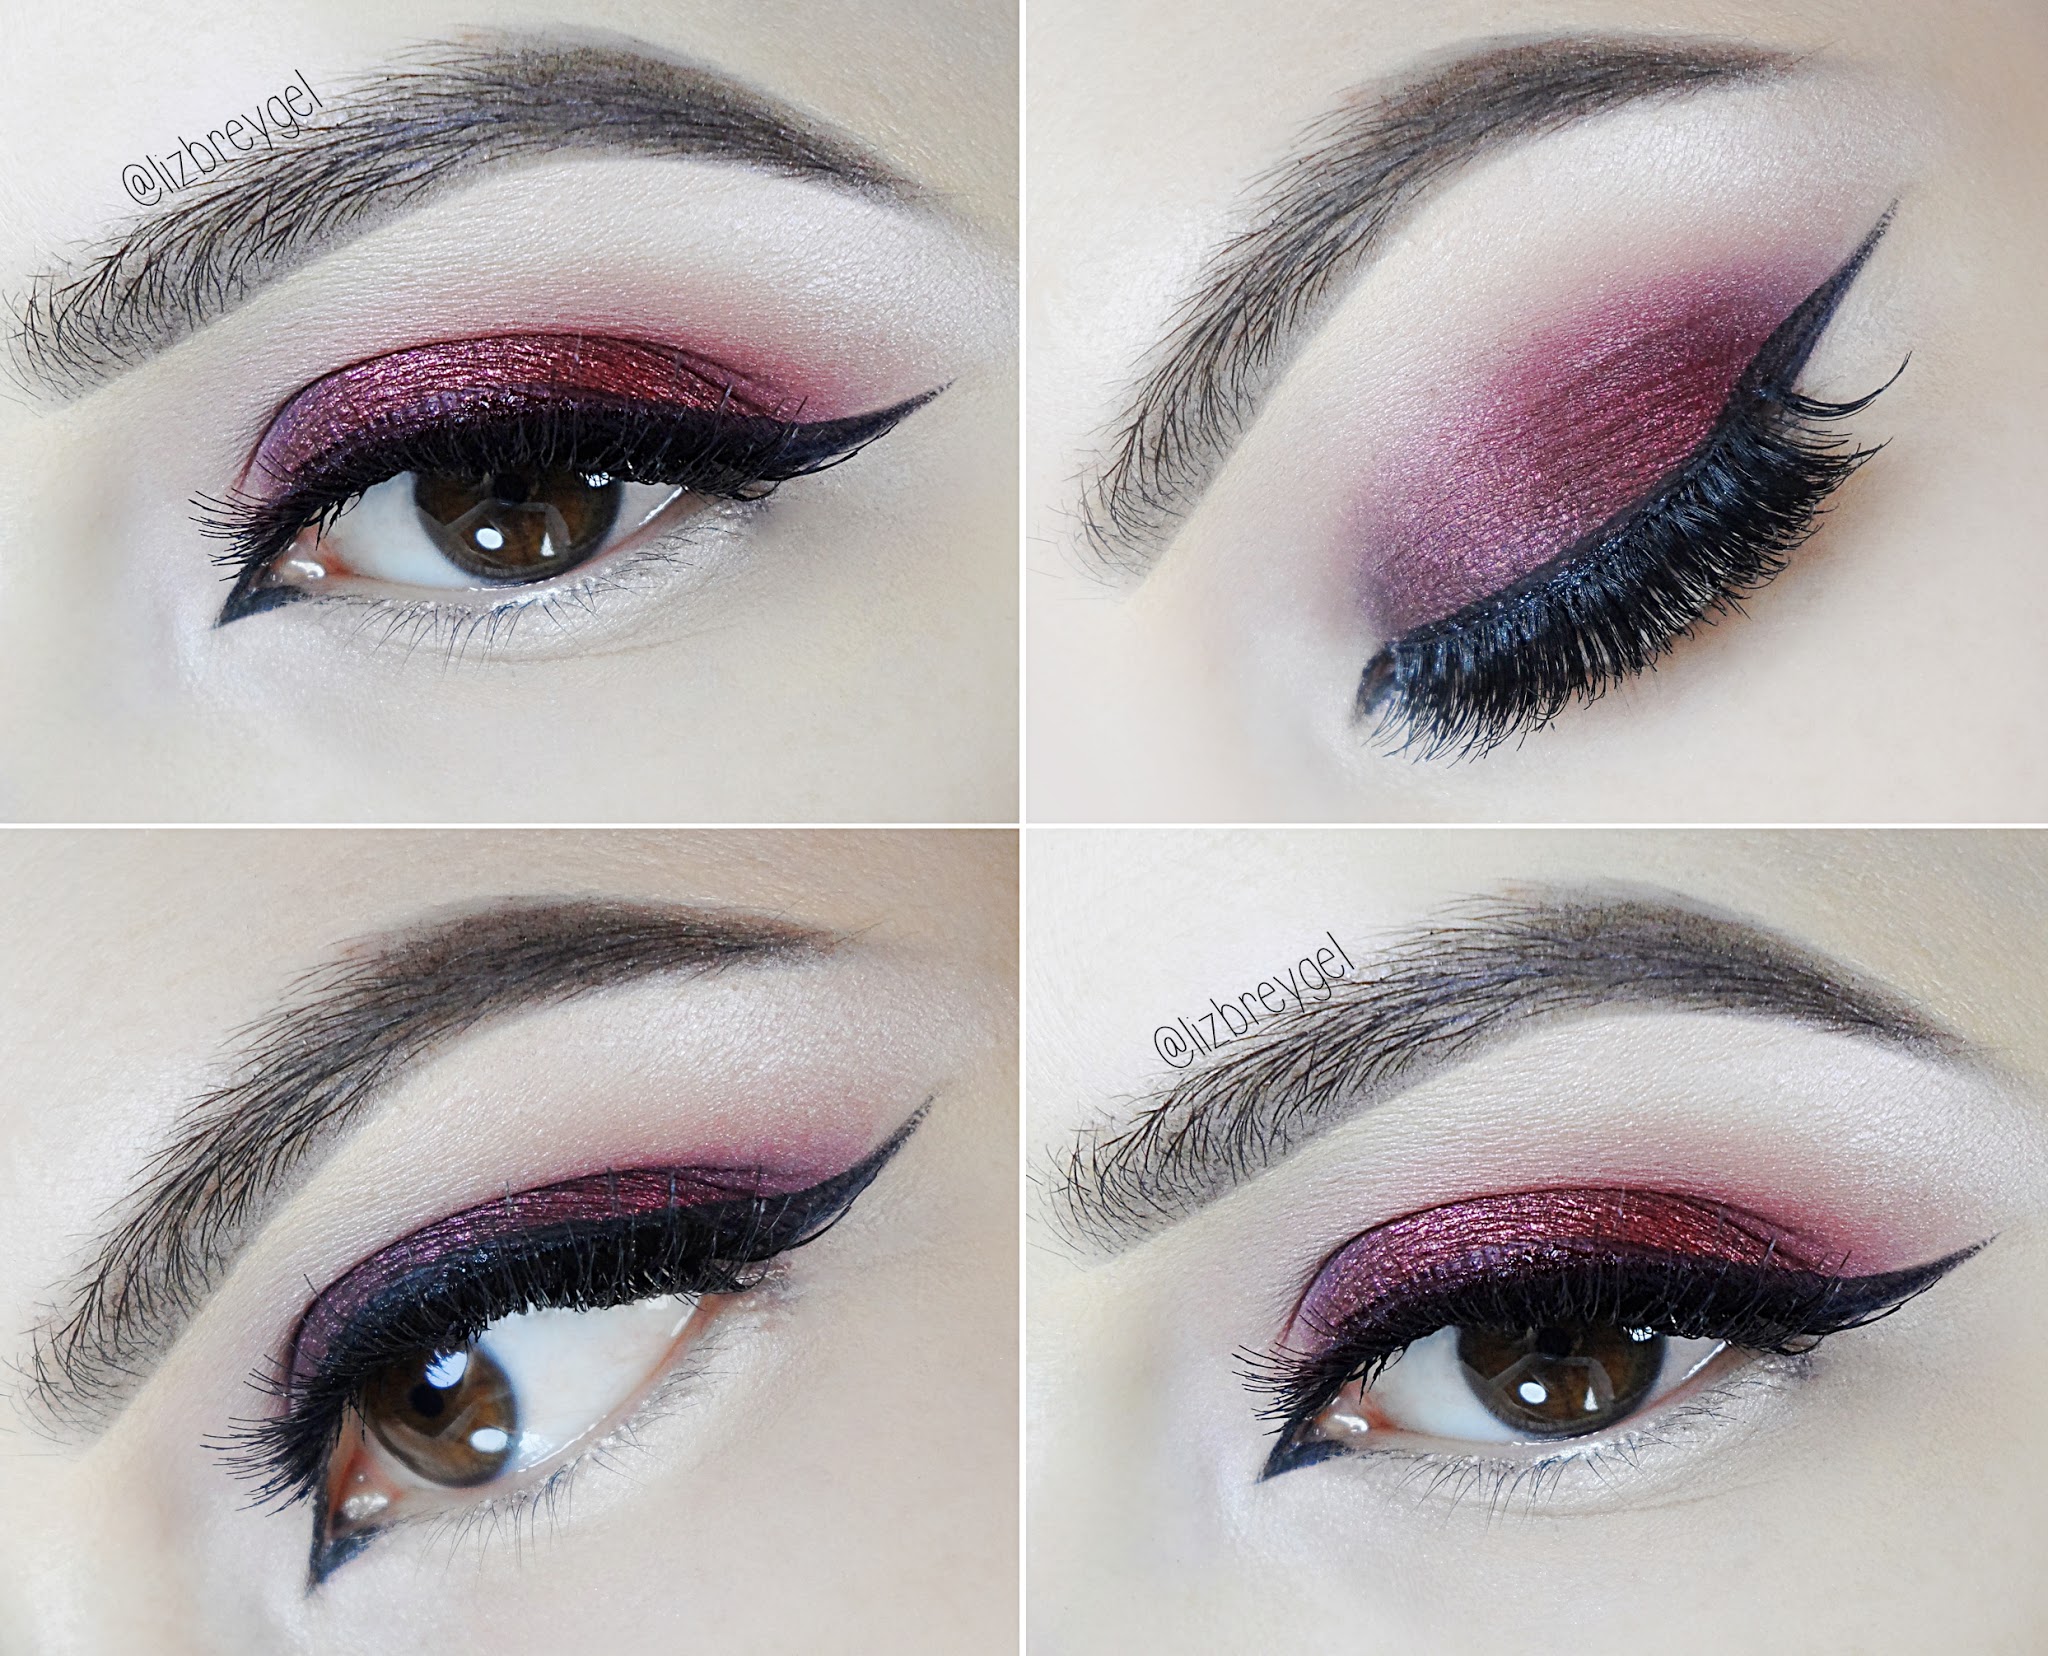 makeup pictorial showing how to do a red smokey eye look inspired by ruby stone